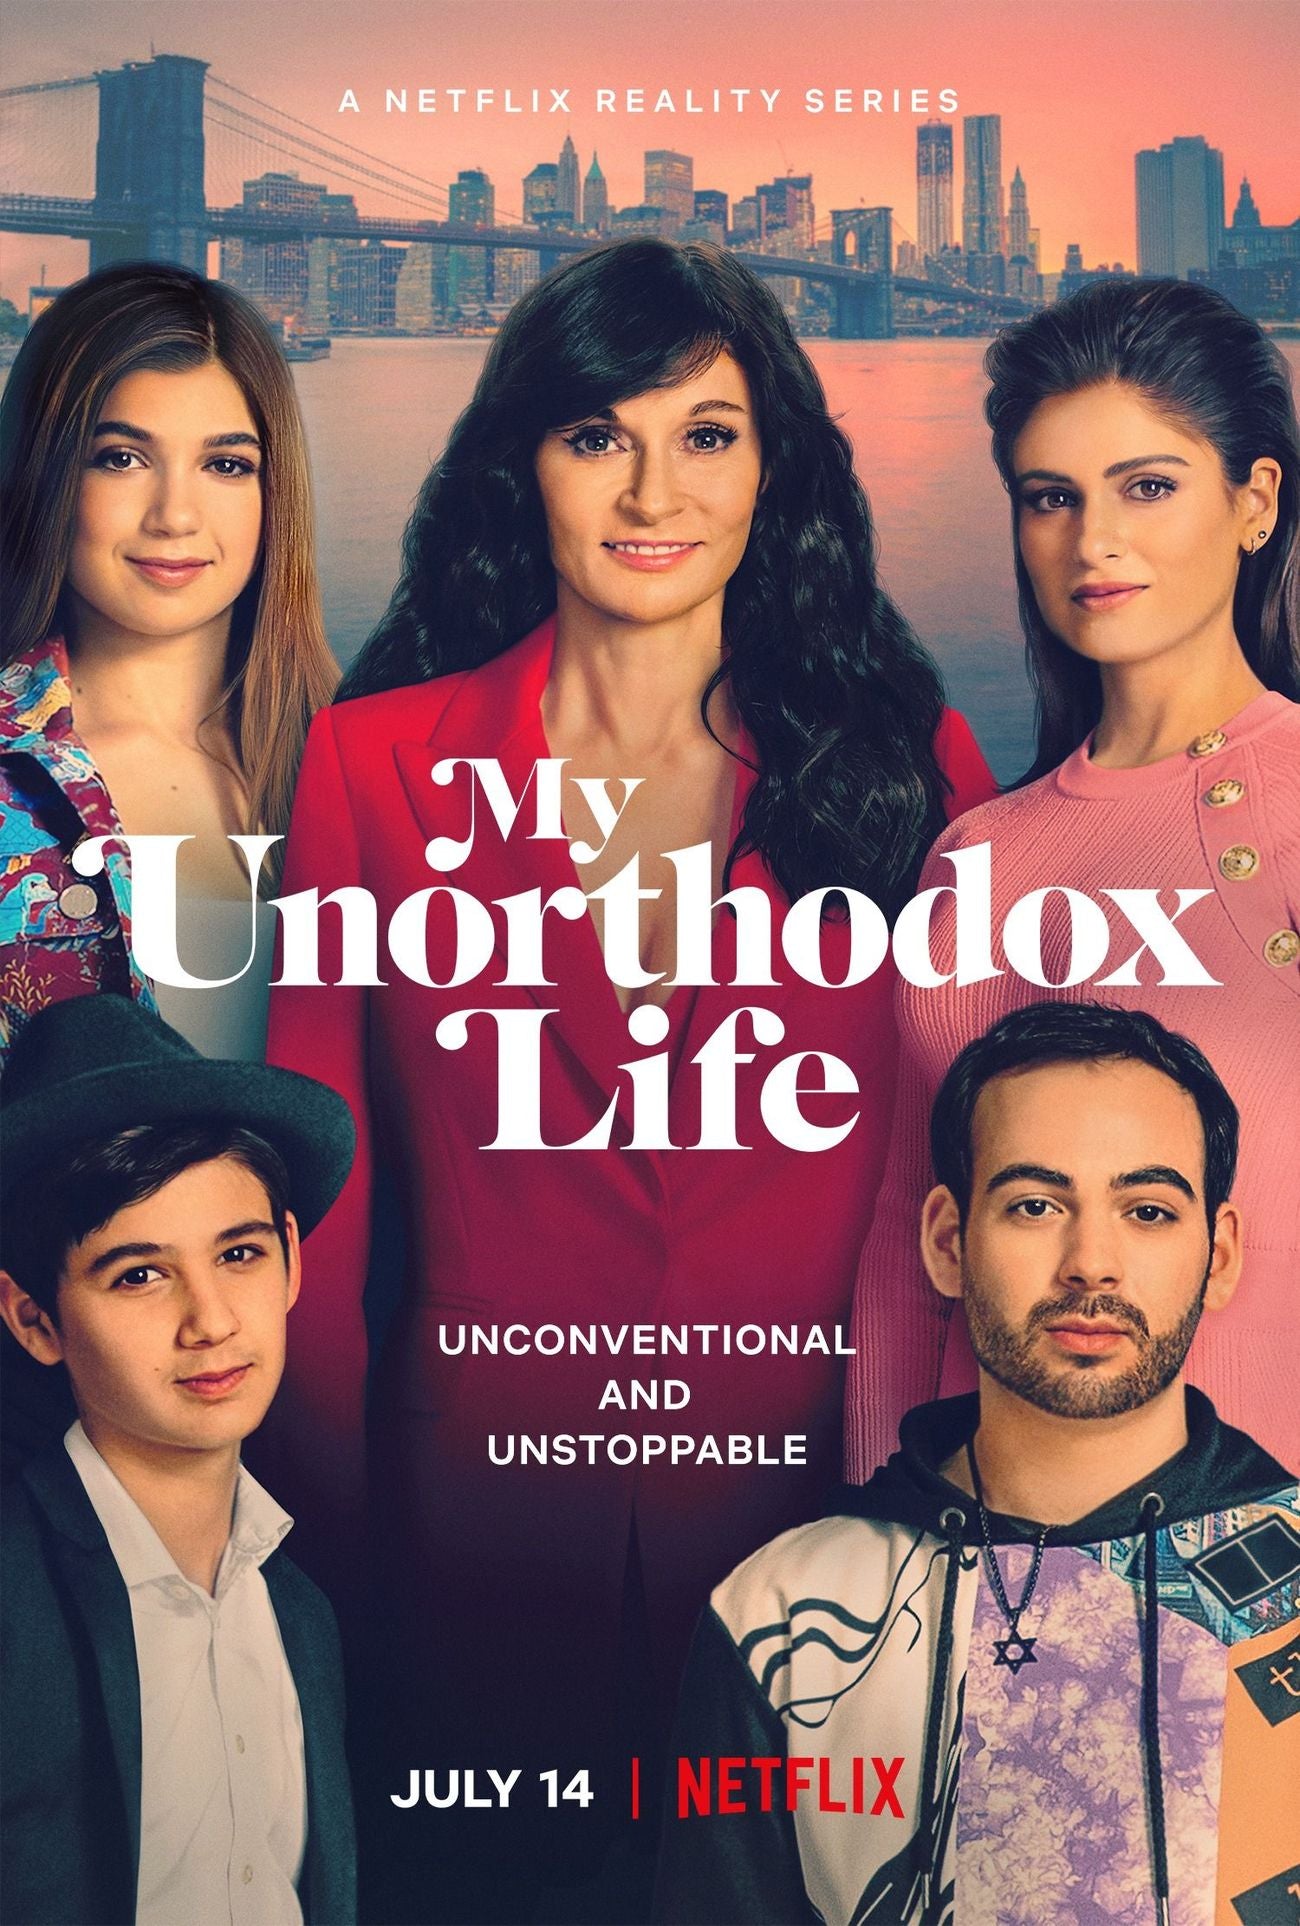 Body by Julia Haart - The Star Of 'My Unorthodox Life' Unifying